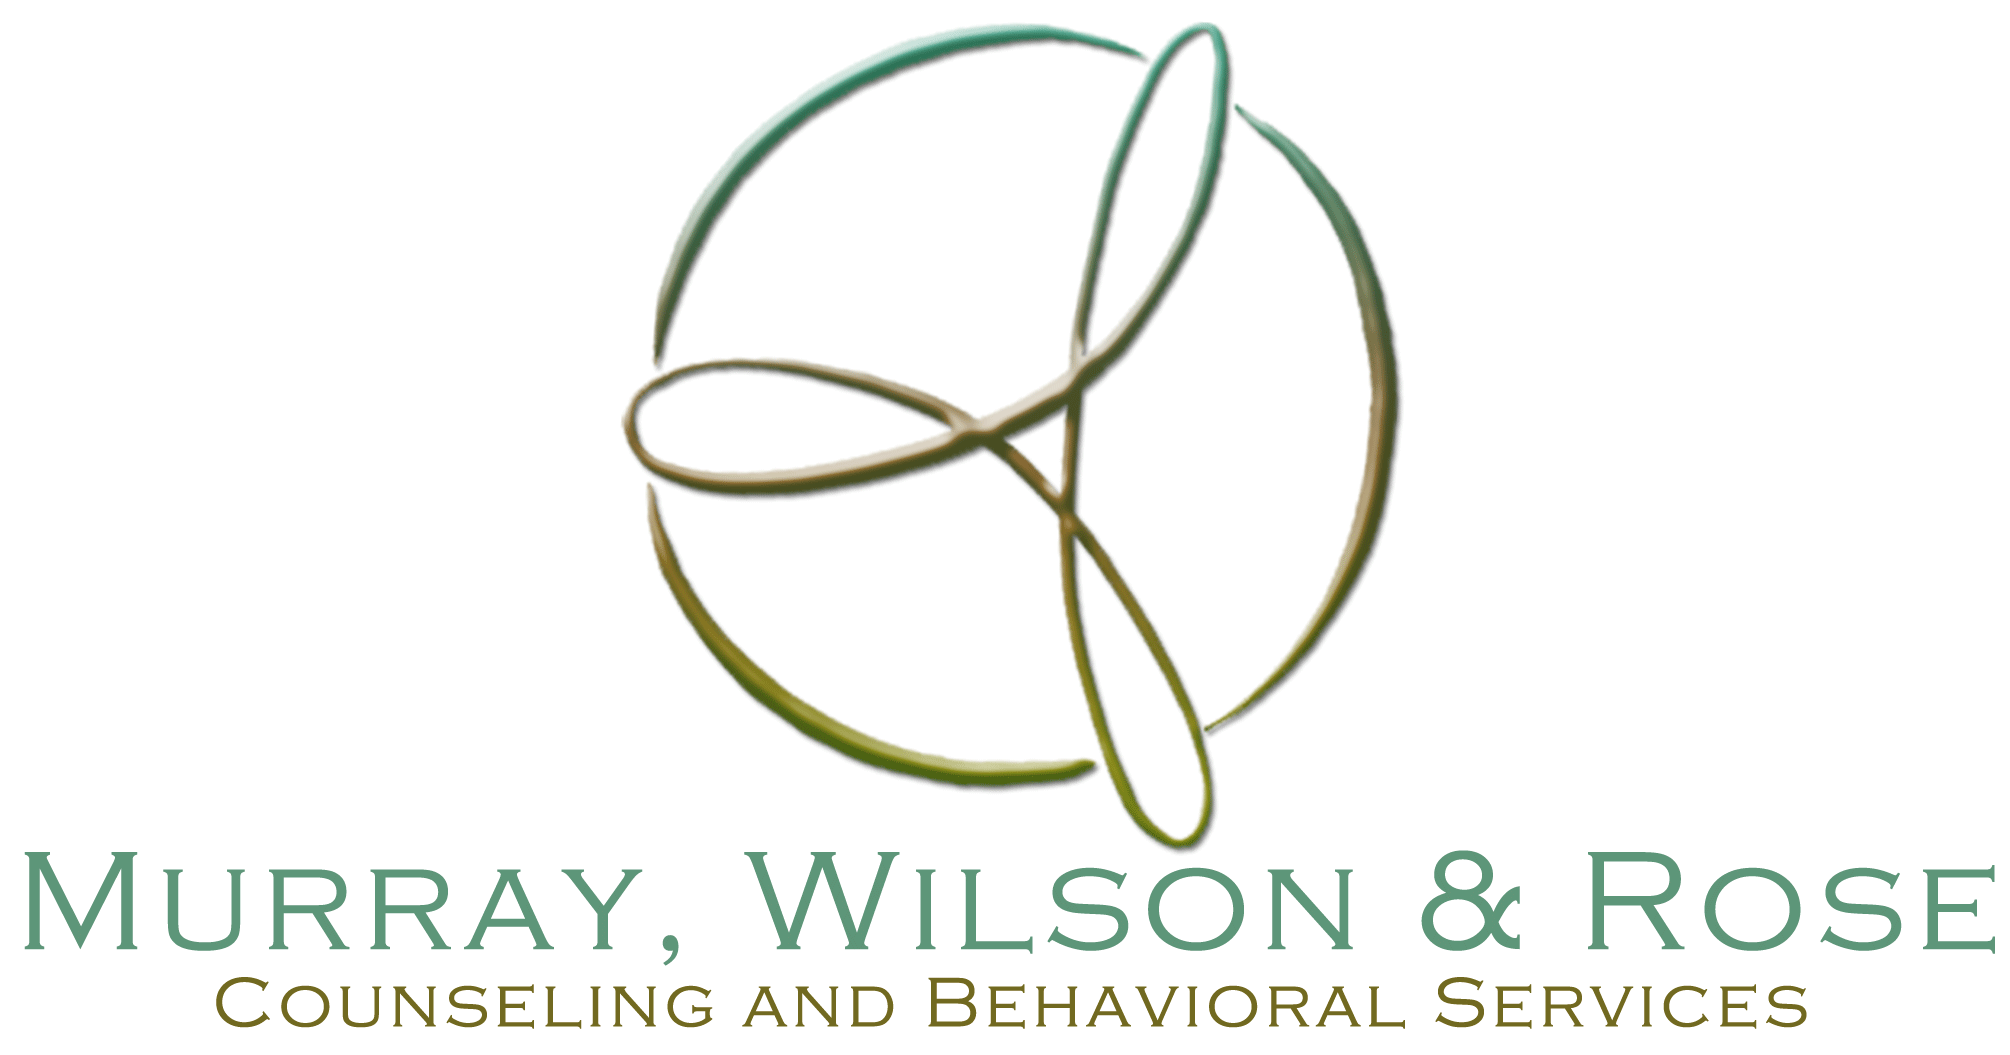 Counseling Logo - Murray, Wilson, & Rose | Counseling & Behavioral Services | Cedar Rapids